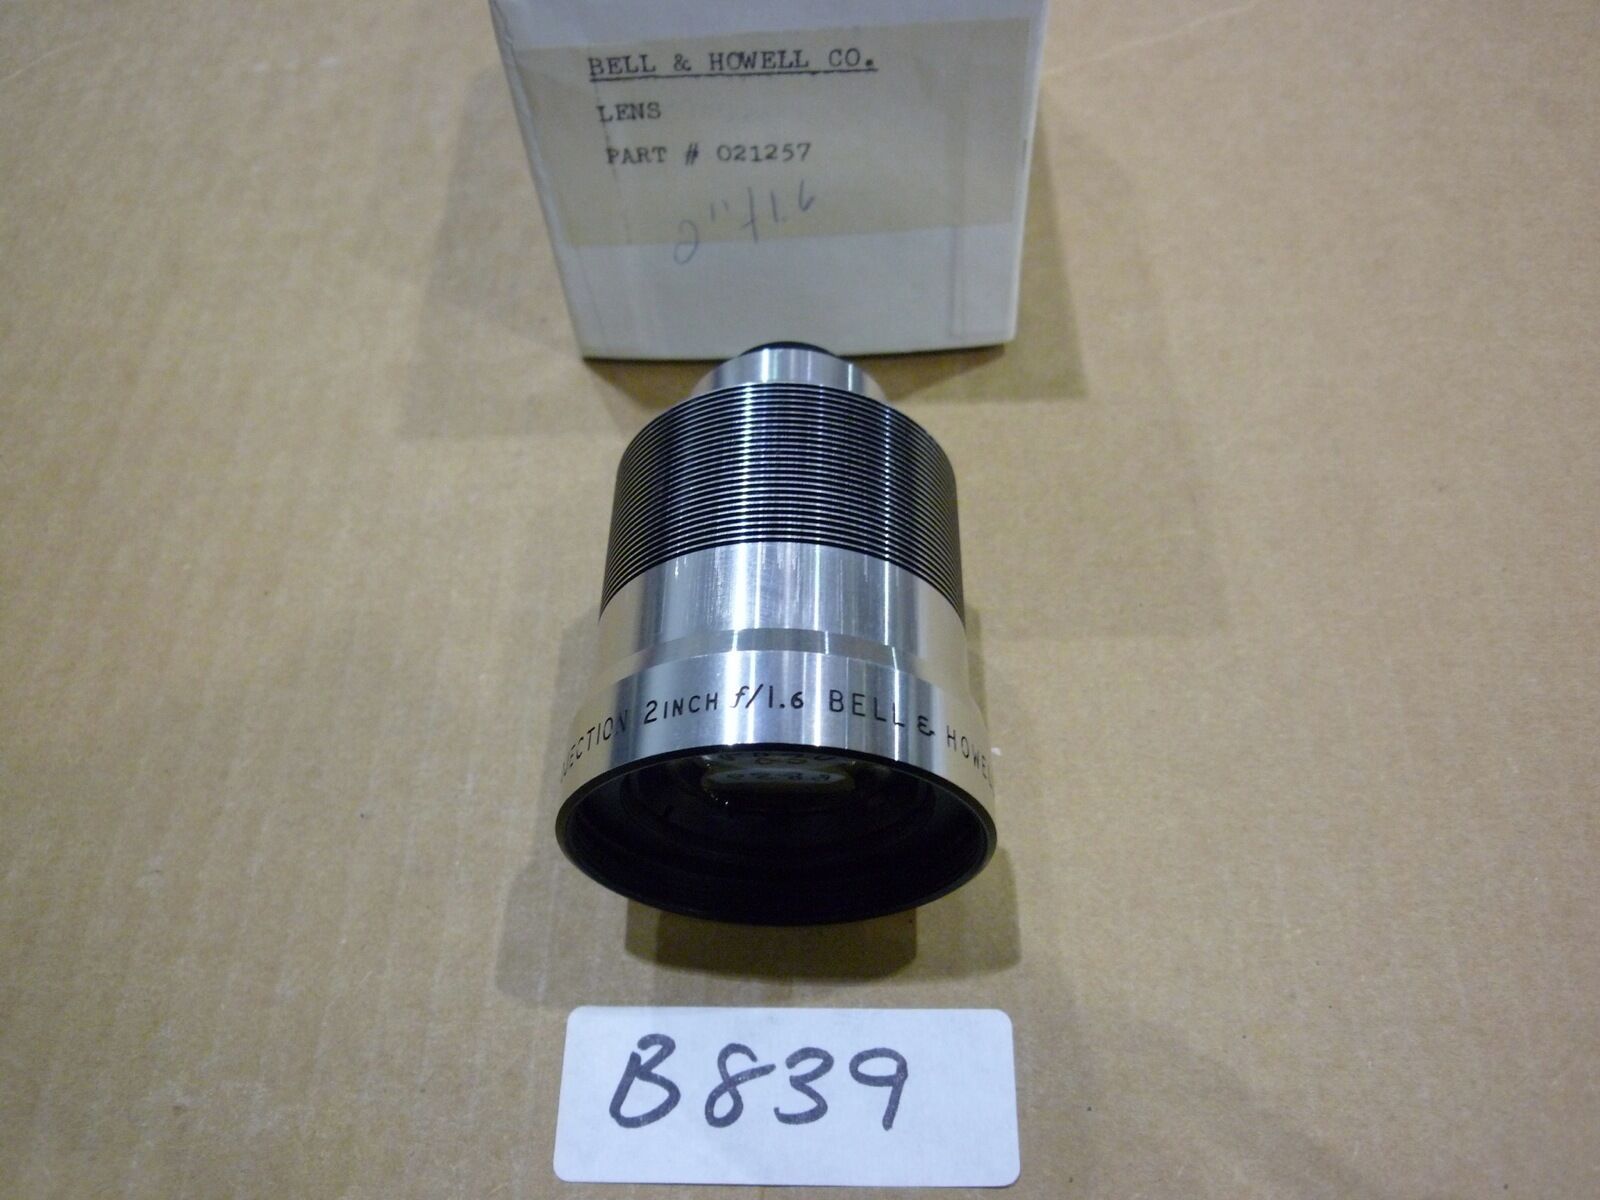 Bell & Howell 16 mm Projector Lens - $135.00